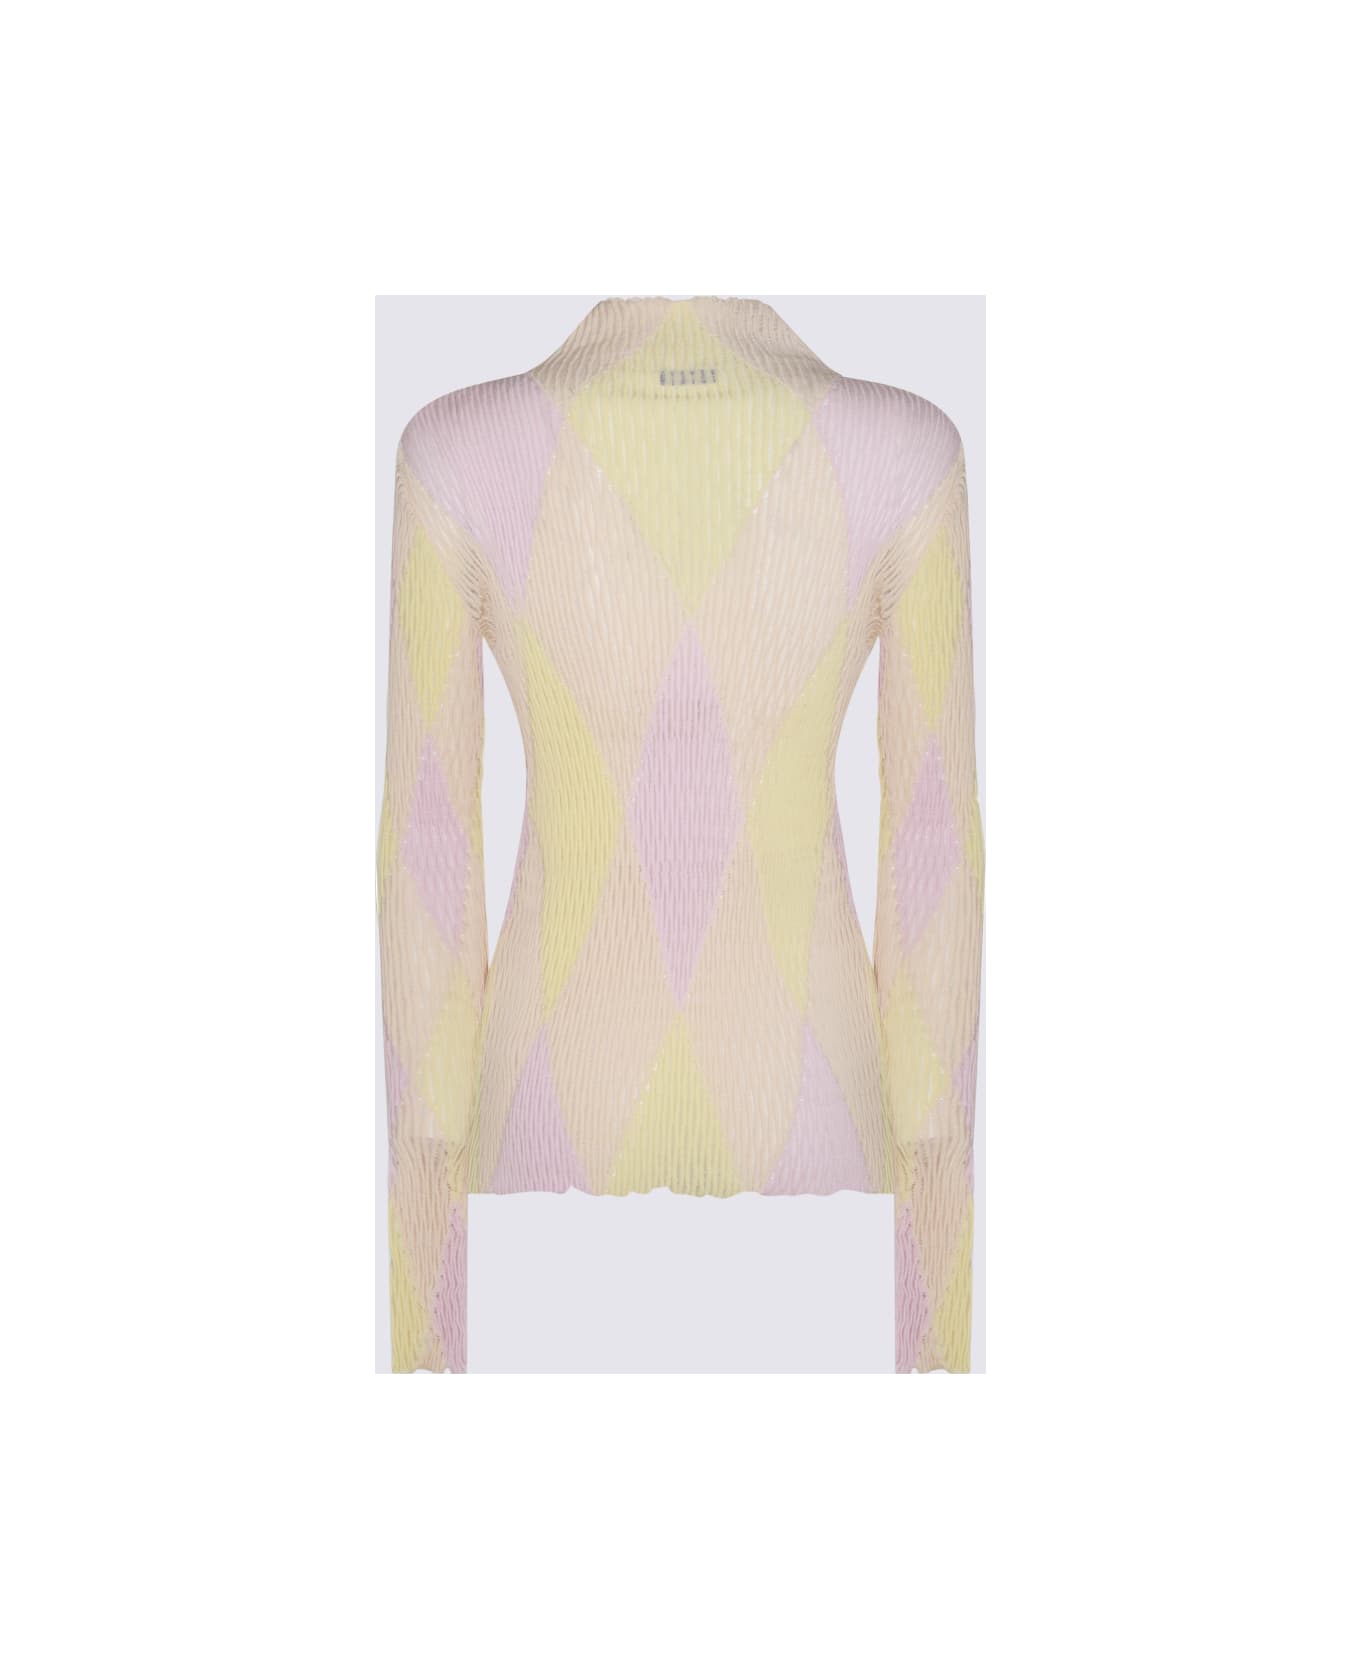 Burberry Multicolor Cotton Knitwear - Cameo ip pattern